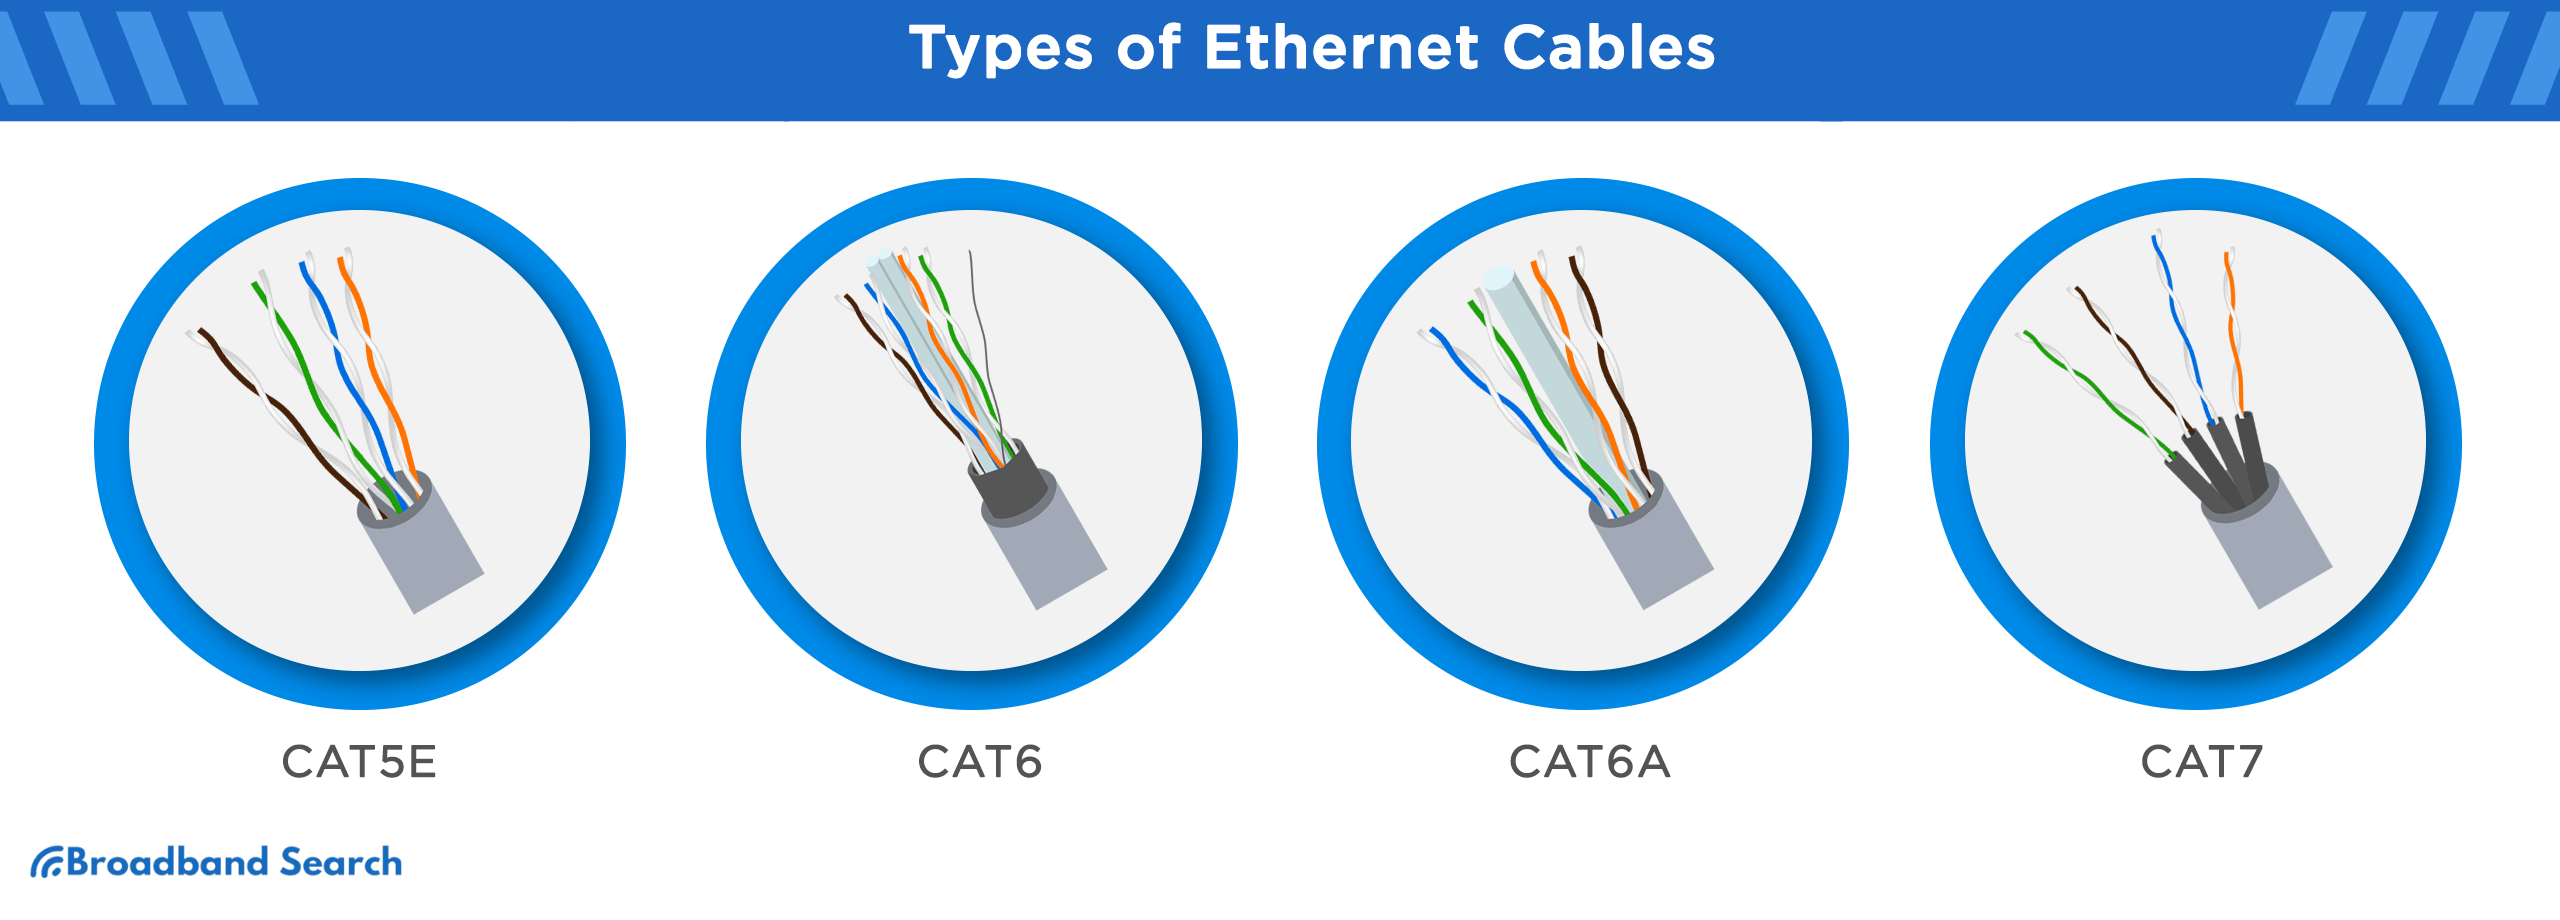 Graphic showing the types of ethernet cables